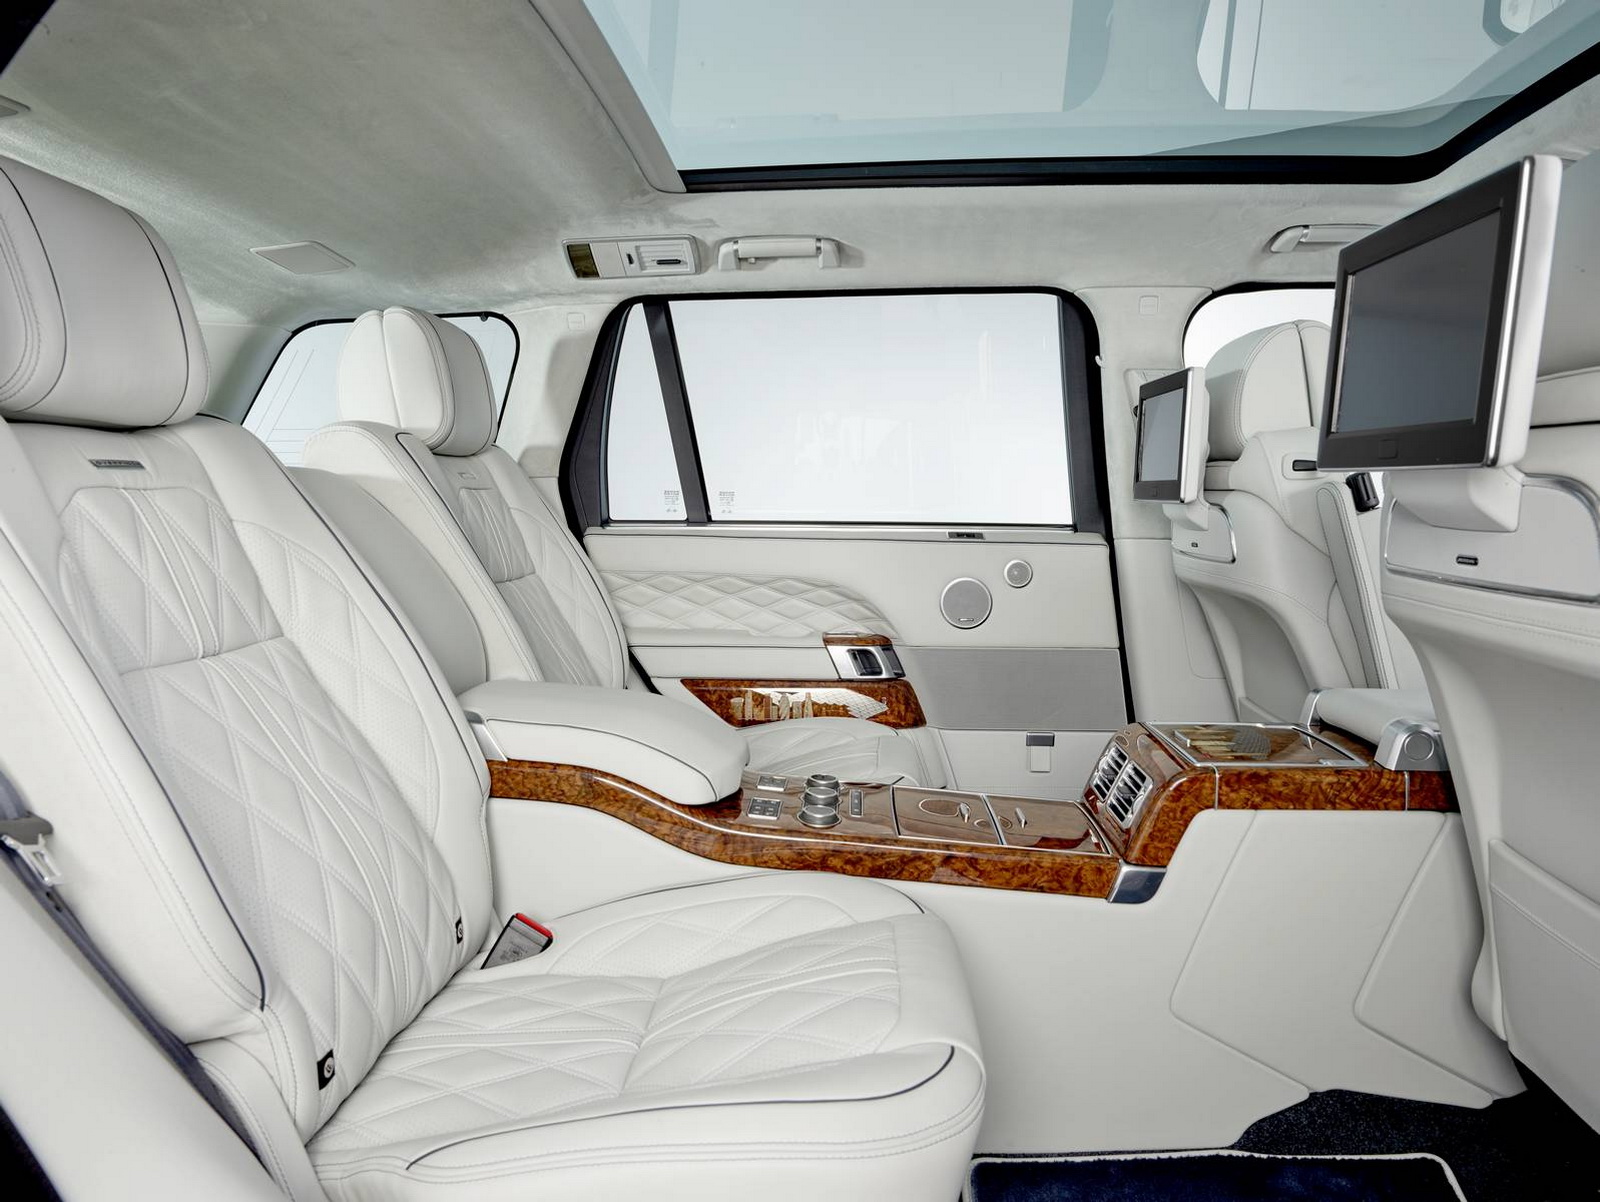 Overfinch London Edition Range Rover Autobiography Revealed